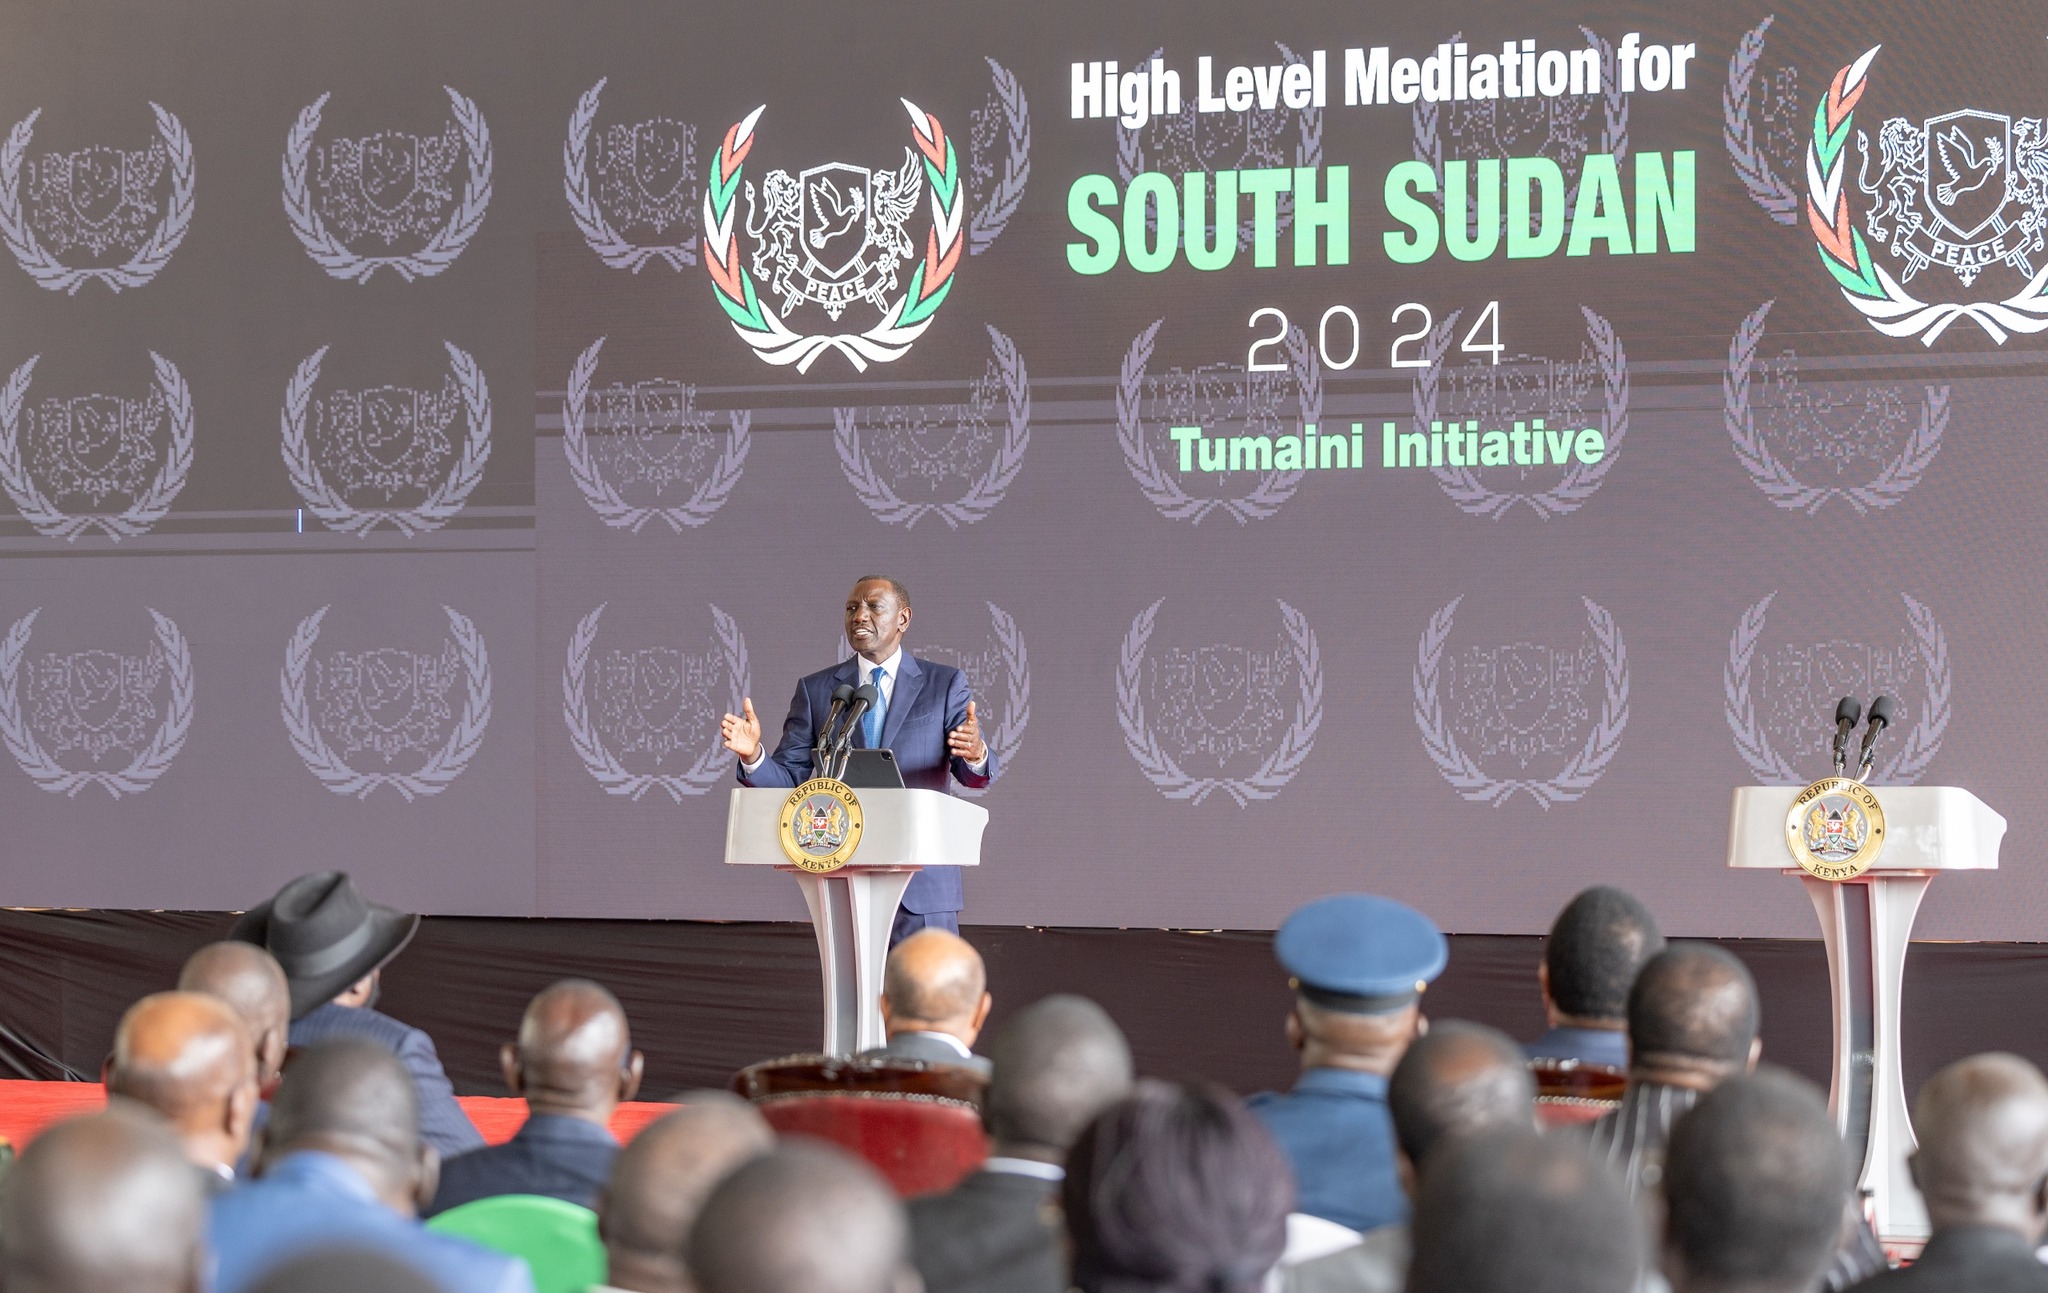 President William Ruto during the launch of high-level meditation for South Sudan at State House.